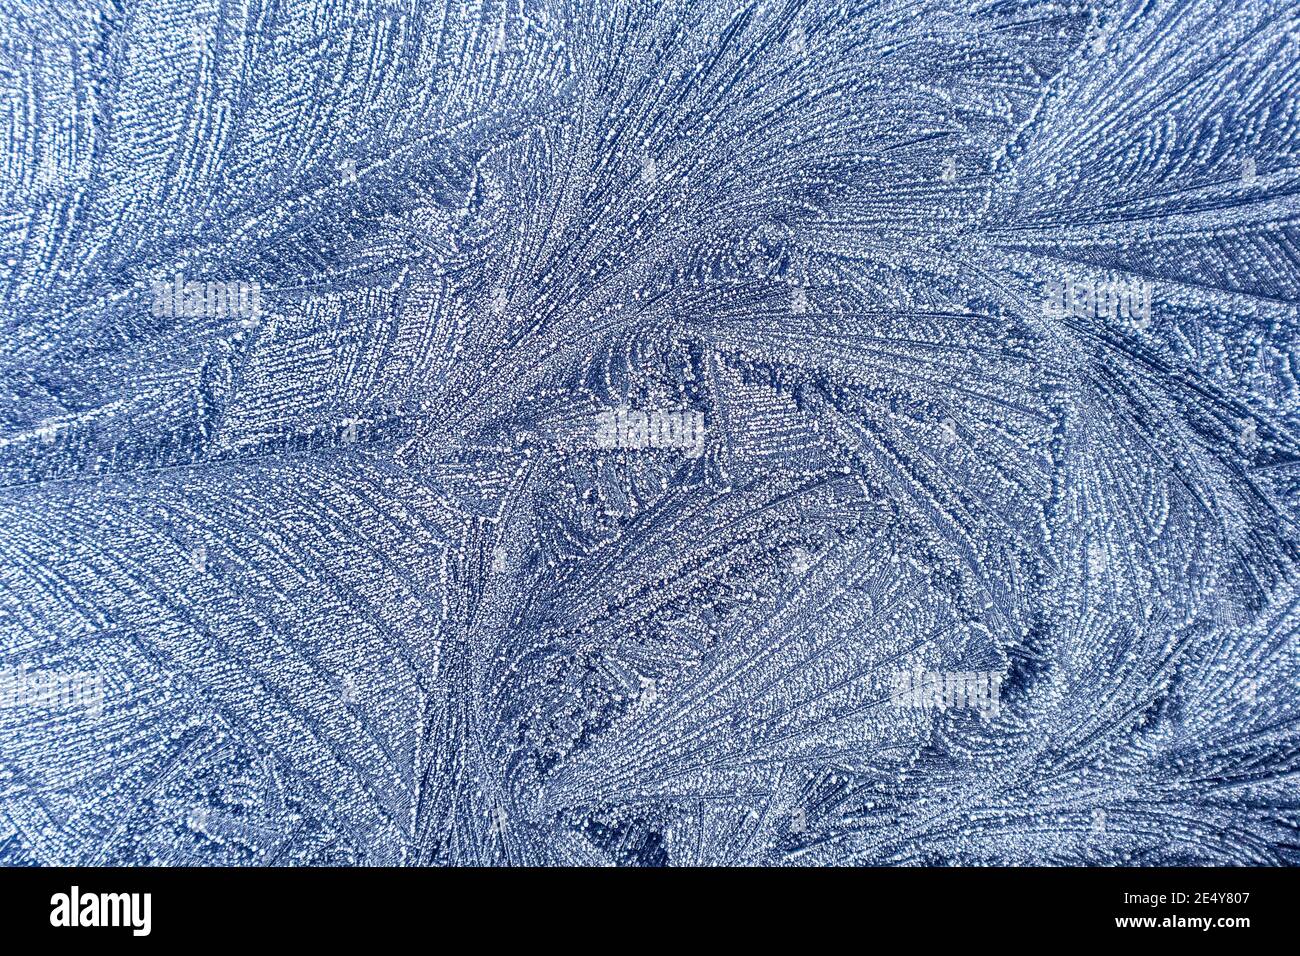 Frost pattern on a cold winter morning on the bonnet of a car Stock Photo